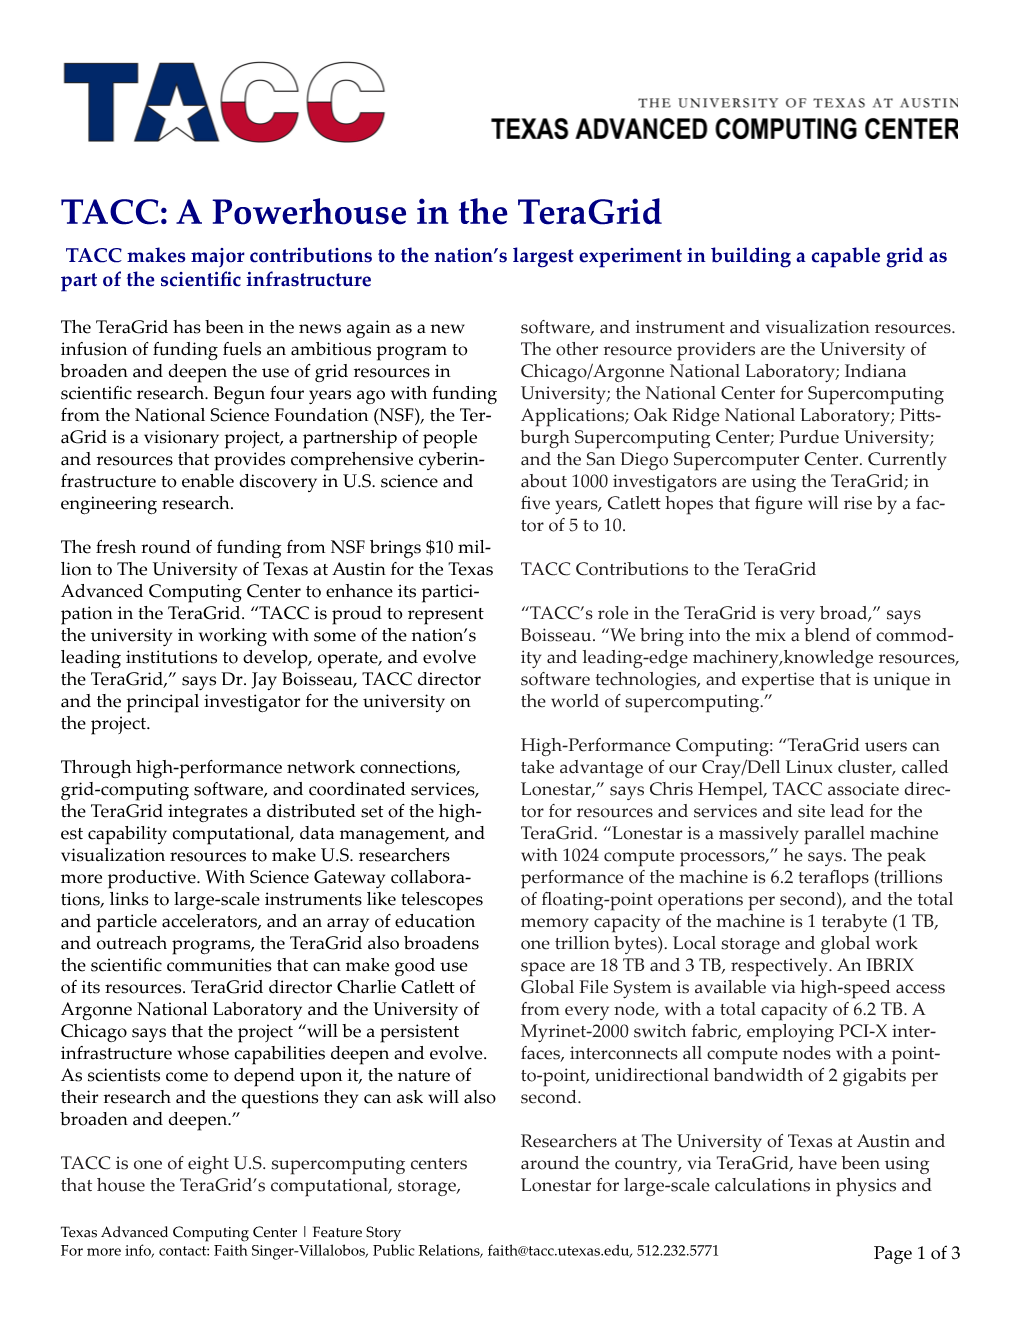 TACC: a Powerhouse in the Teragrid